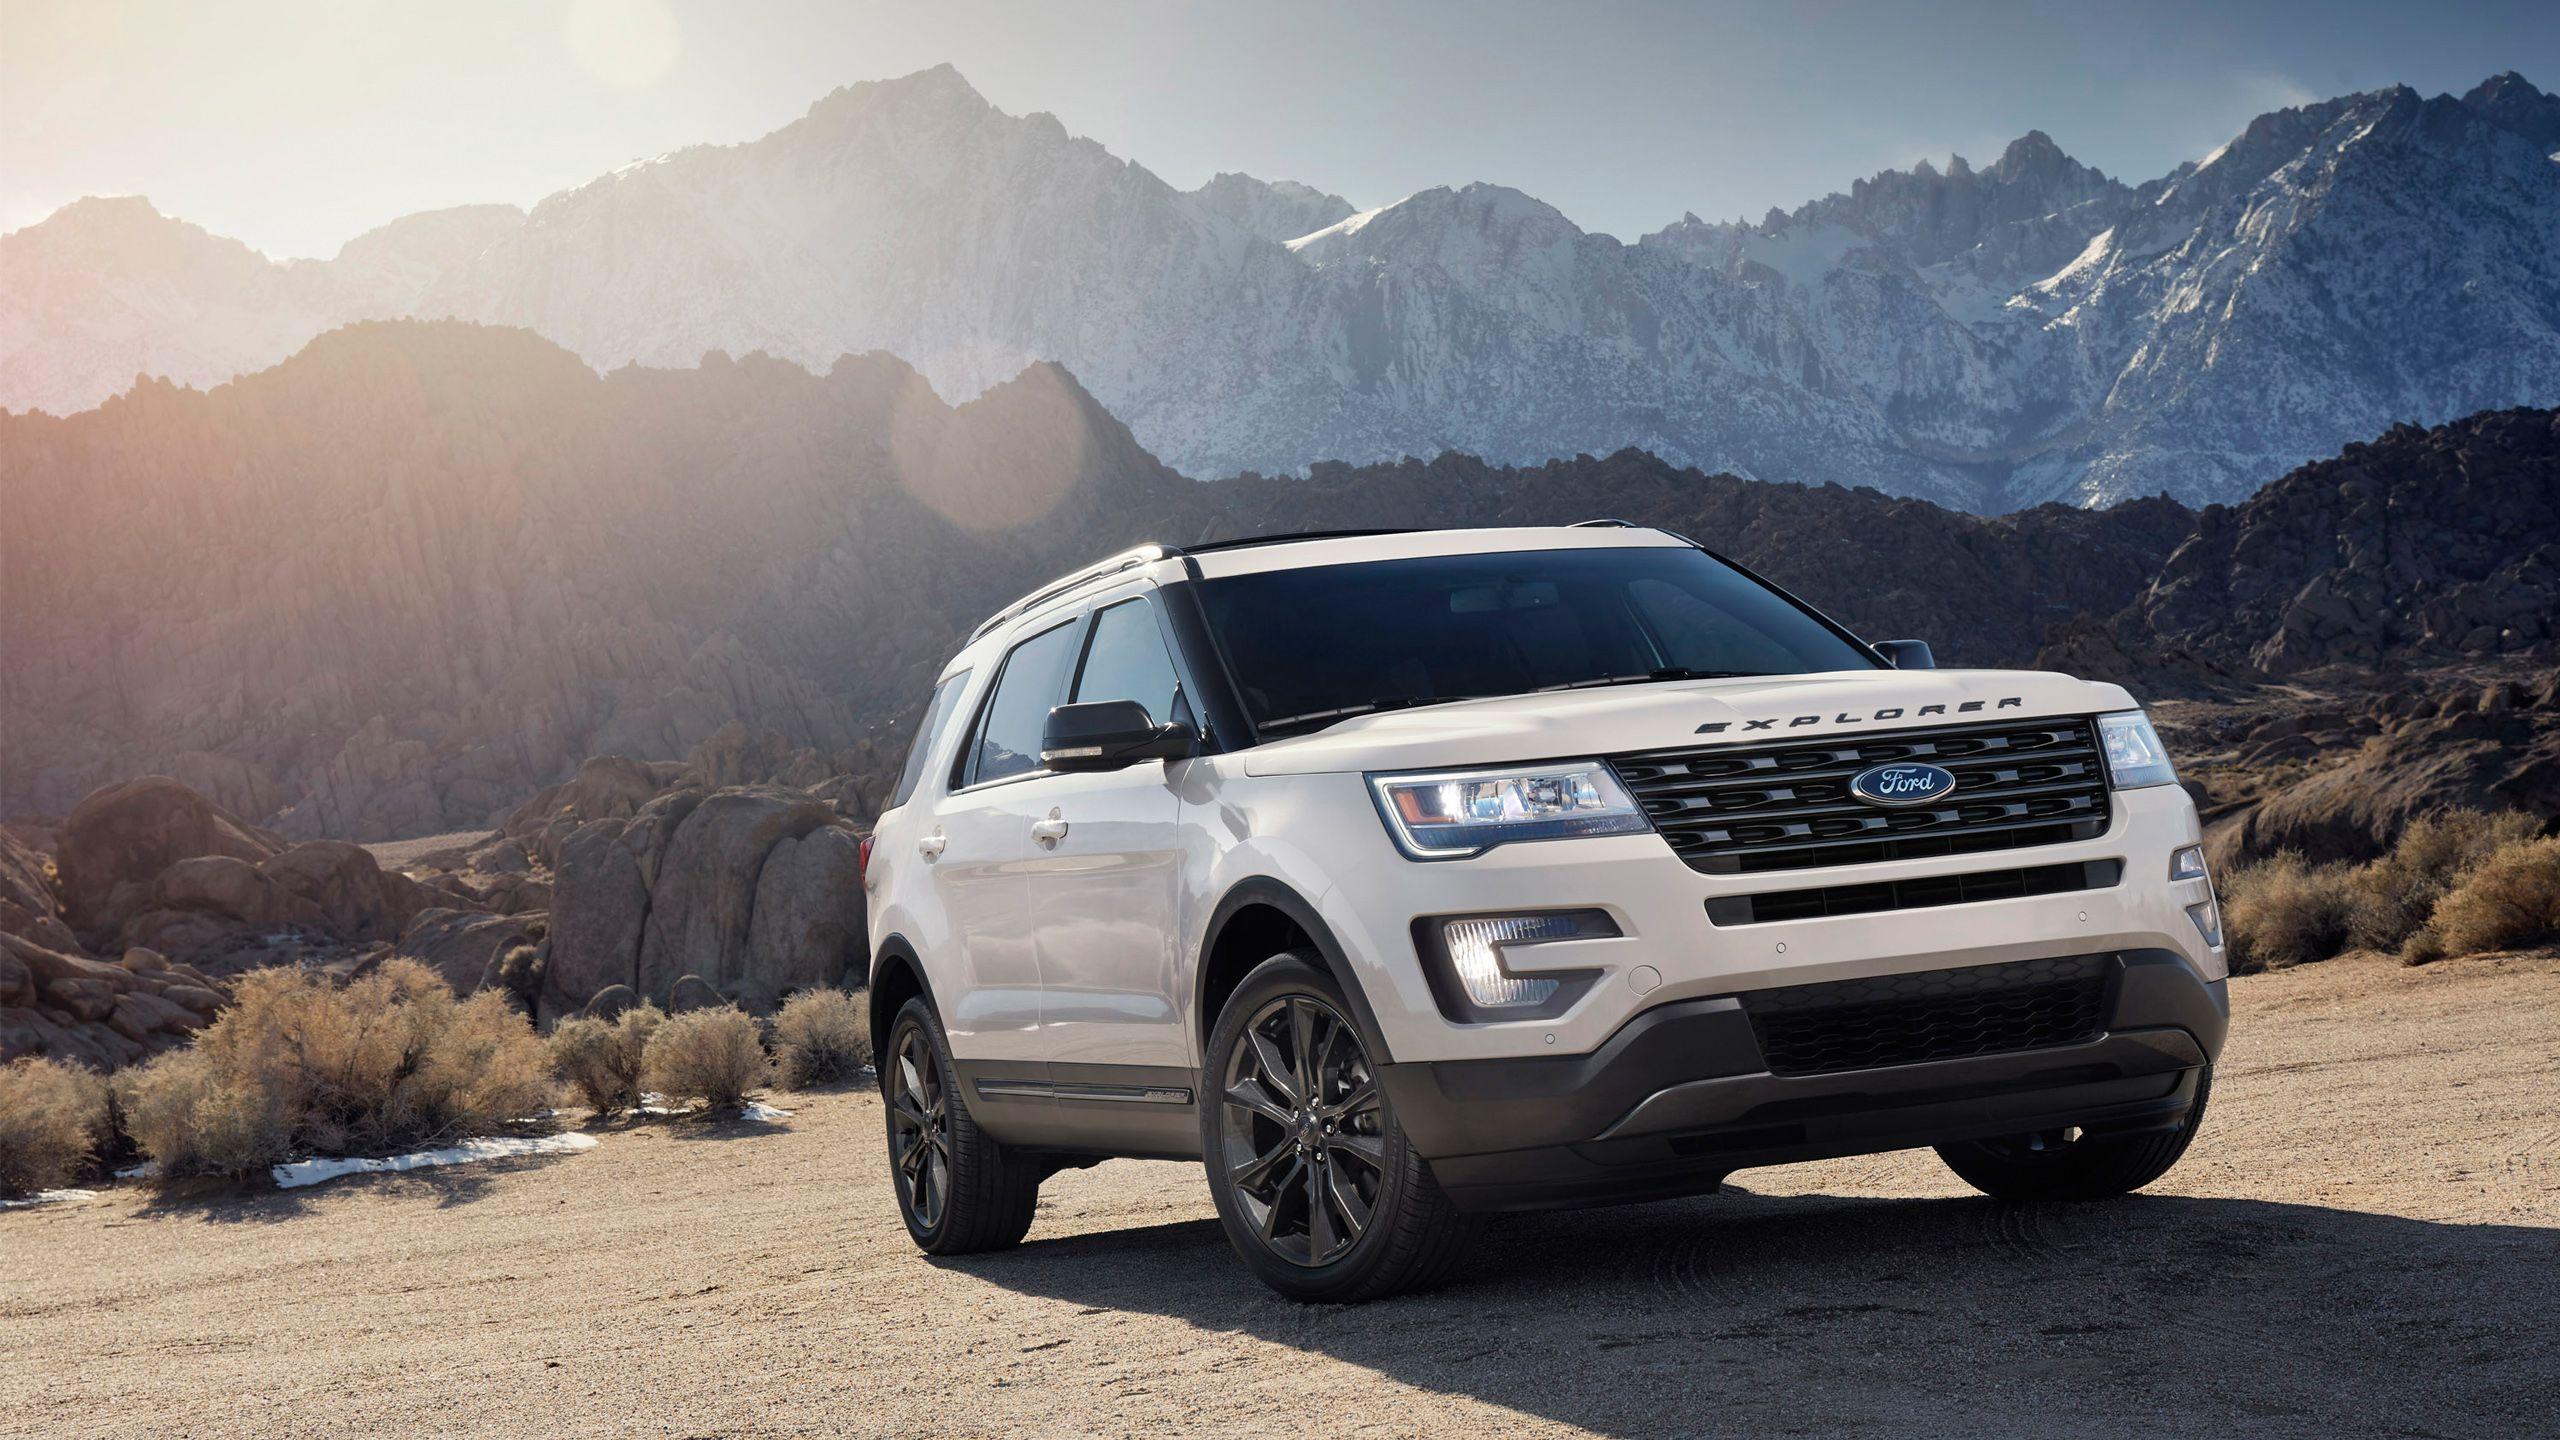 Ford Explorer XLT Appearance Package Wallpaper. HD Car